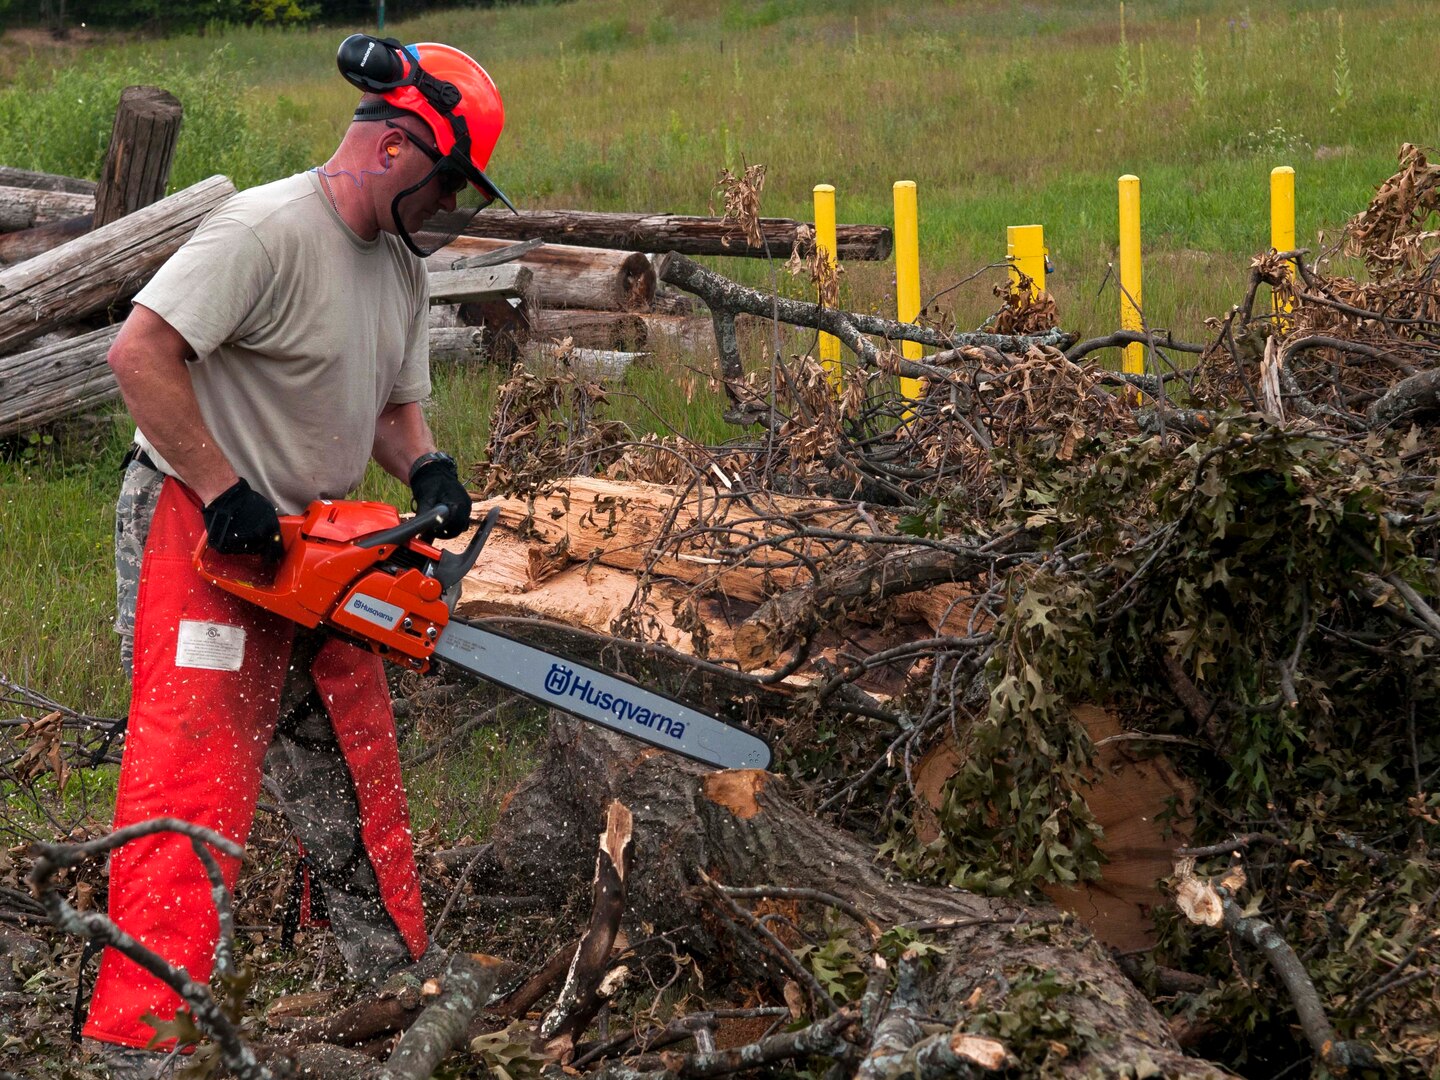 U.S. Air Force Staff Sgt. Justin Wielock from the 103rd Airlift Wing Civil Engineering Squadron, East Granby, Conn., uses a chainsaw to cut some debris blocking a road during a training scenario for PATRIOT North 18 at Volk Field, Wis., July 15, 2018.